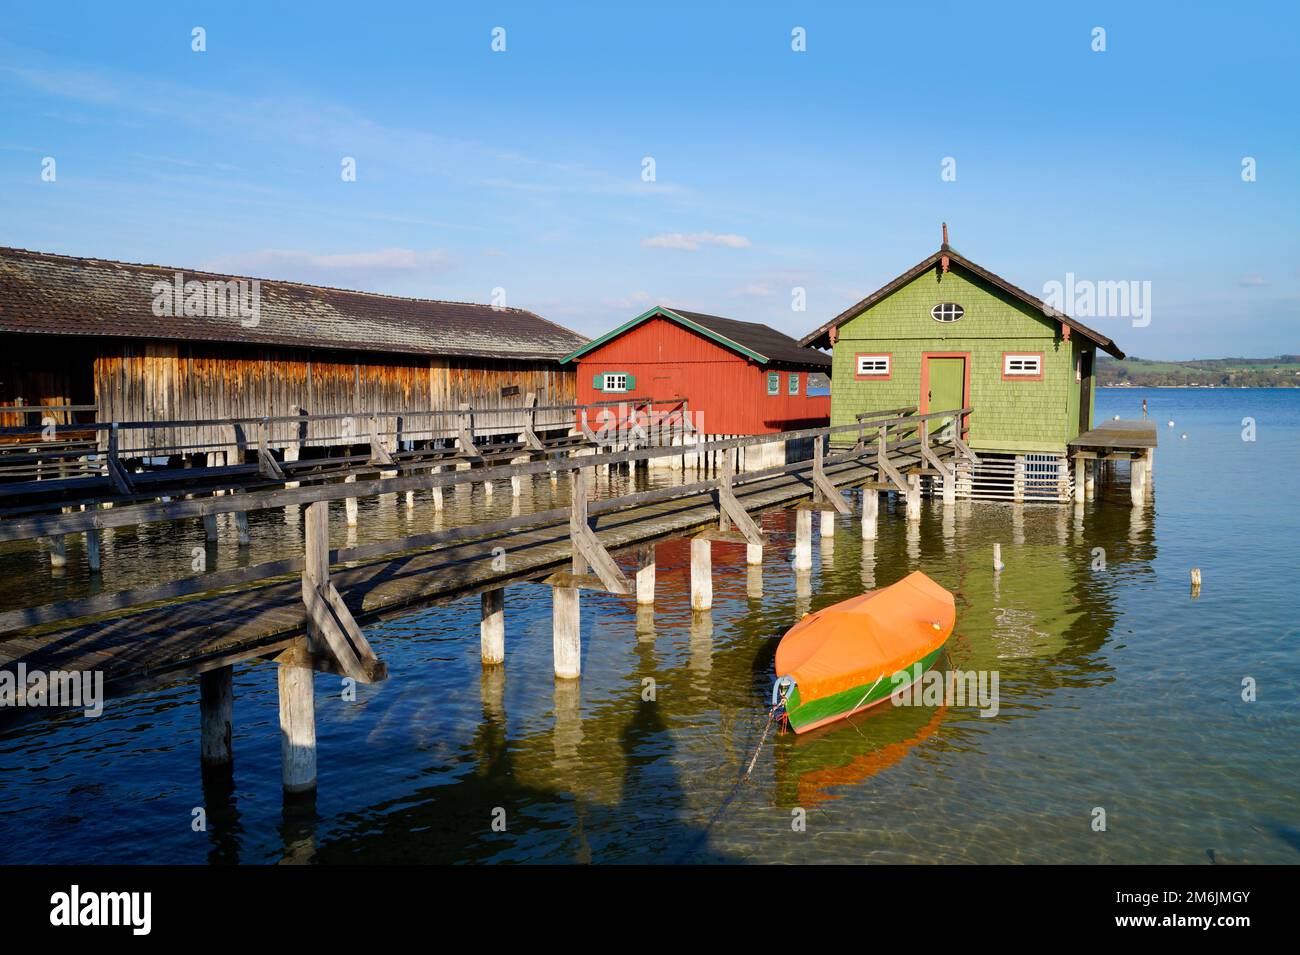 https://c8.alamy.com/comp/2M6JMGY/a-long-wooden-pier-leading-to-the-colorful-boat-houses-on-lake-ammersee-in-the-german-fishing-village-schondorf-ammersee-germany-2M6JMGY.jpg